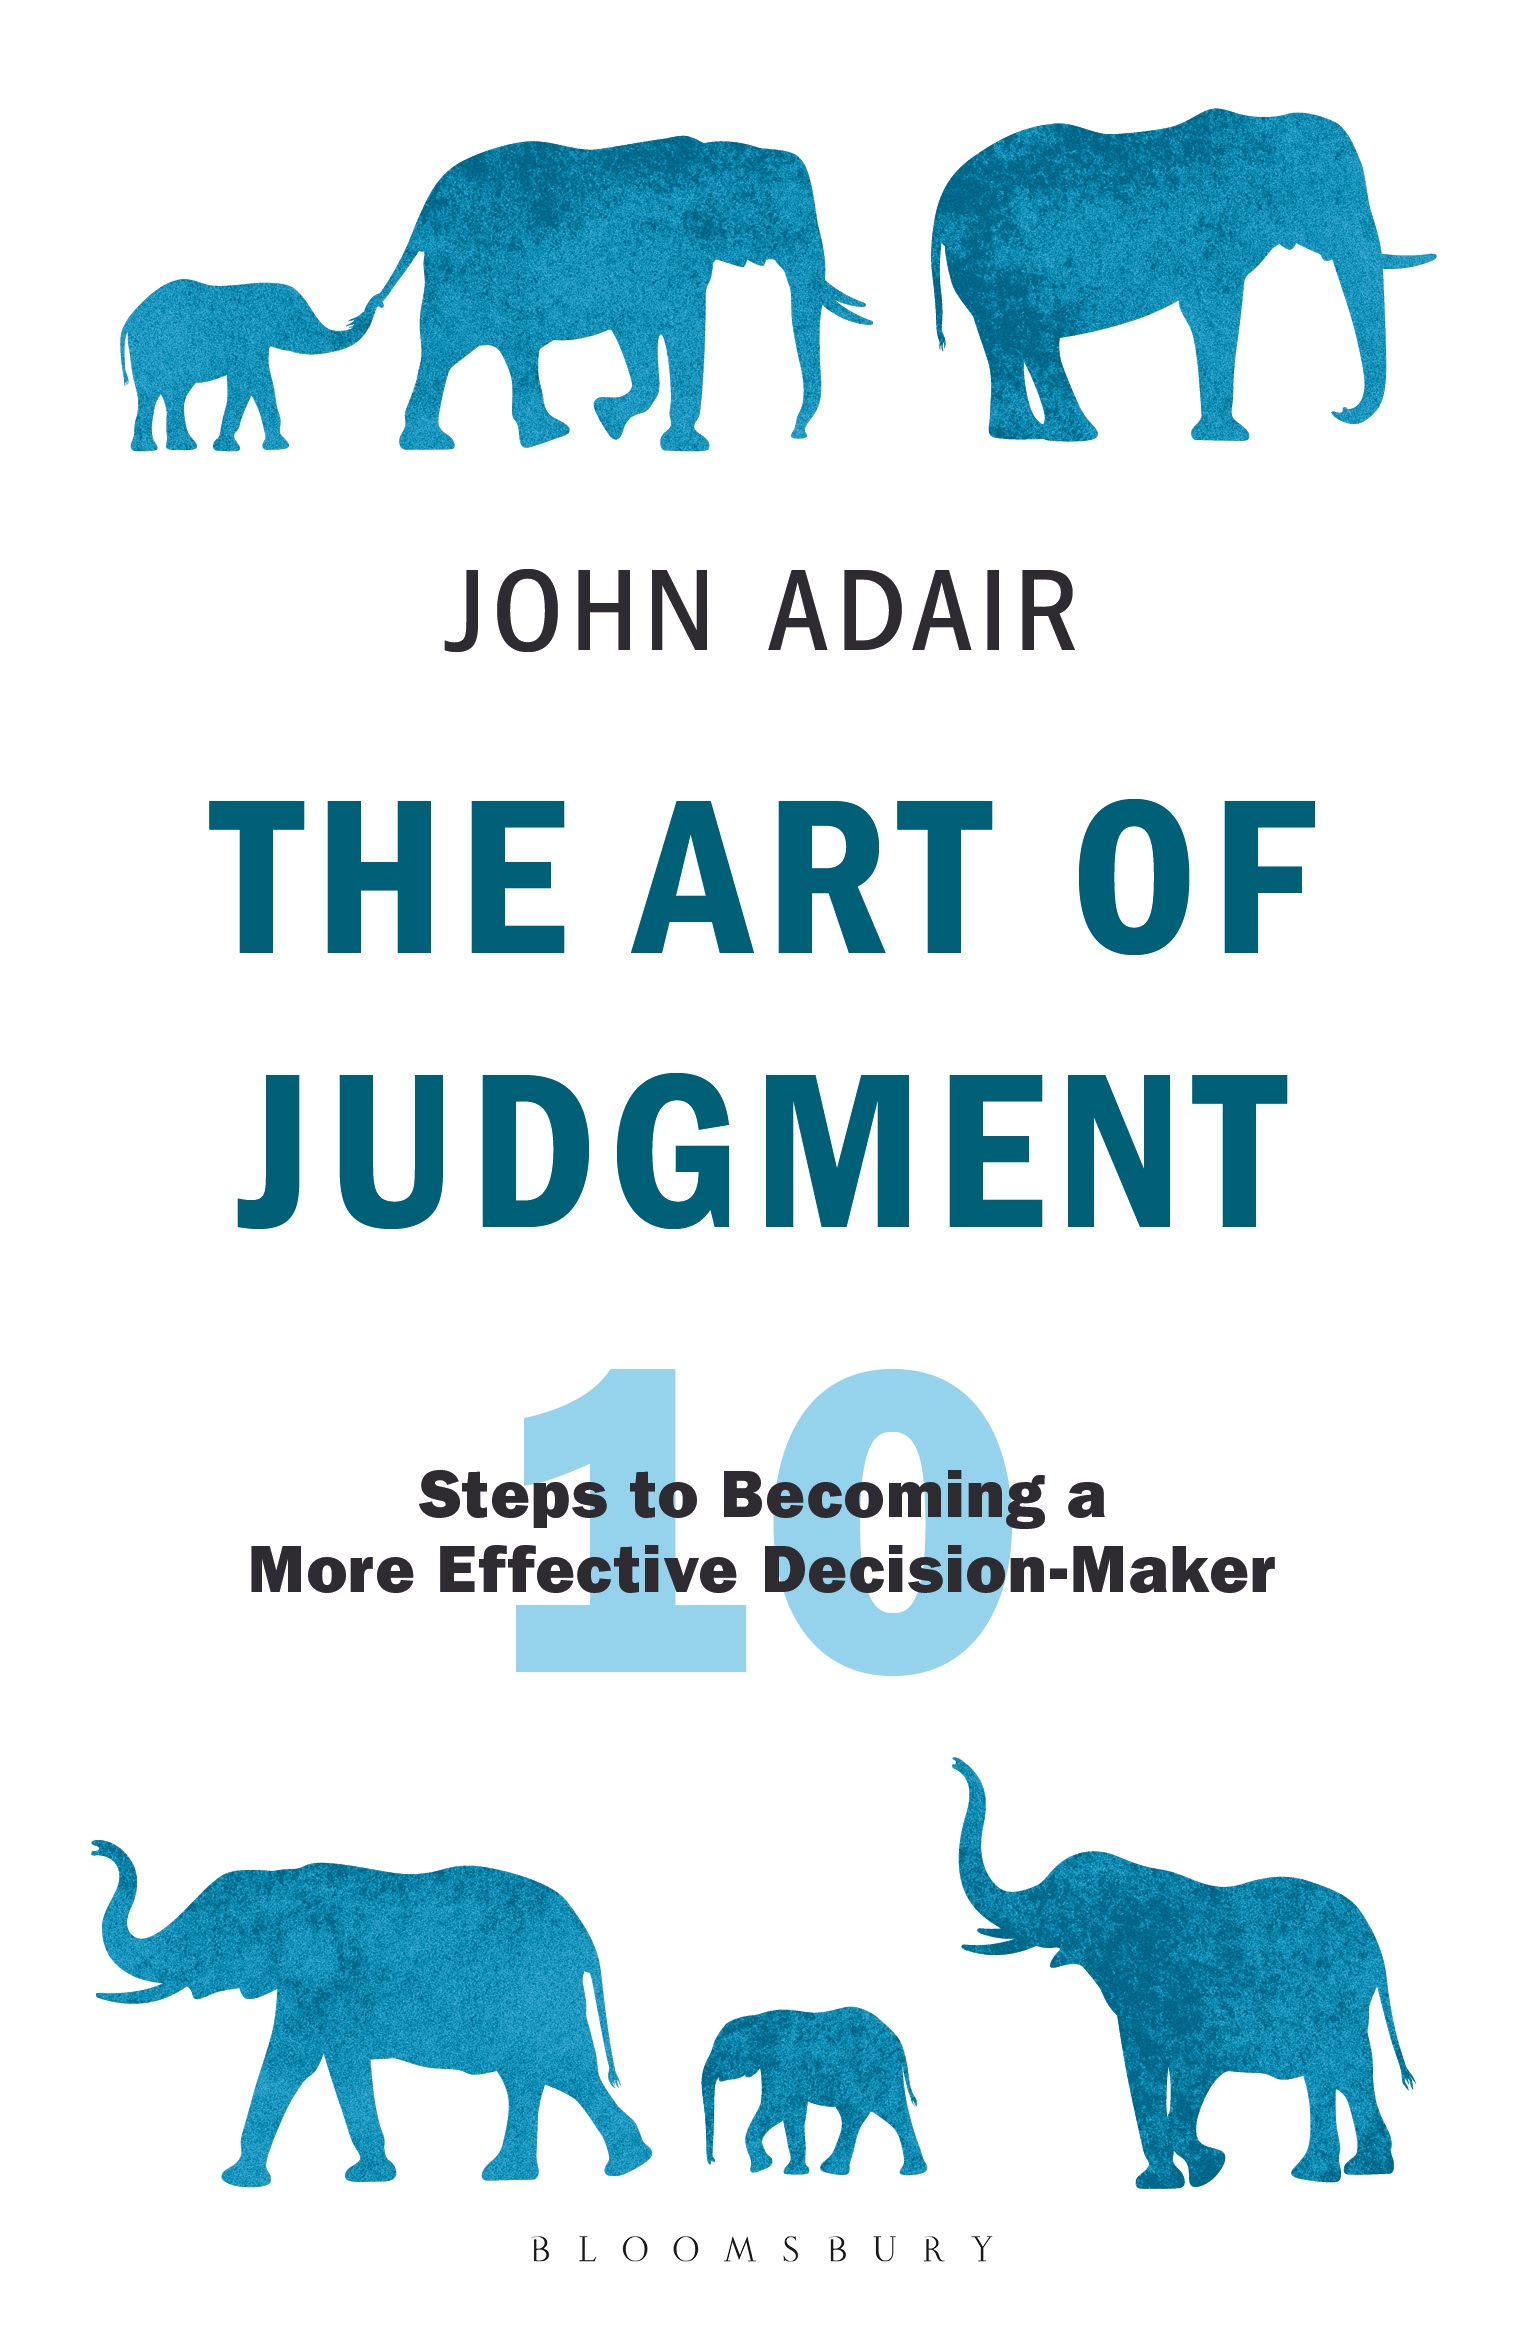 The Art of Judgment - 15-24.99